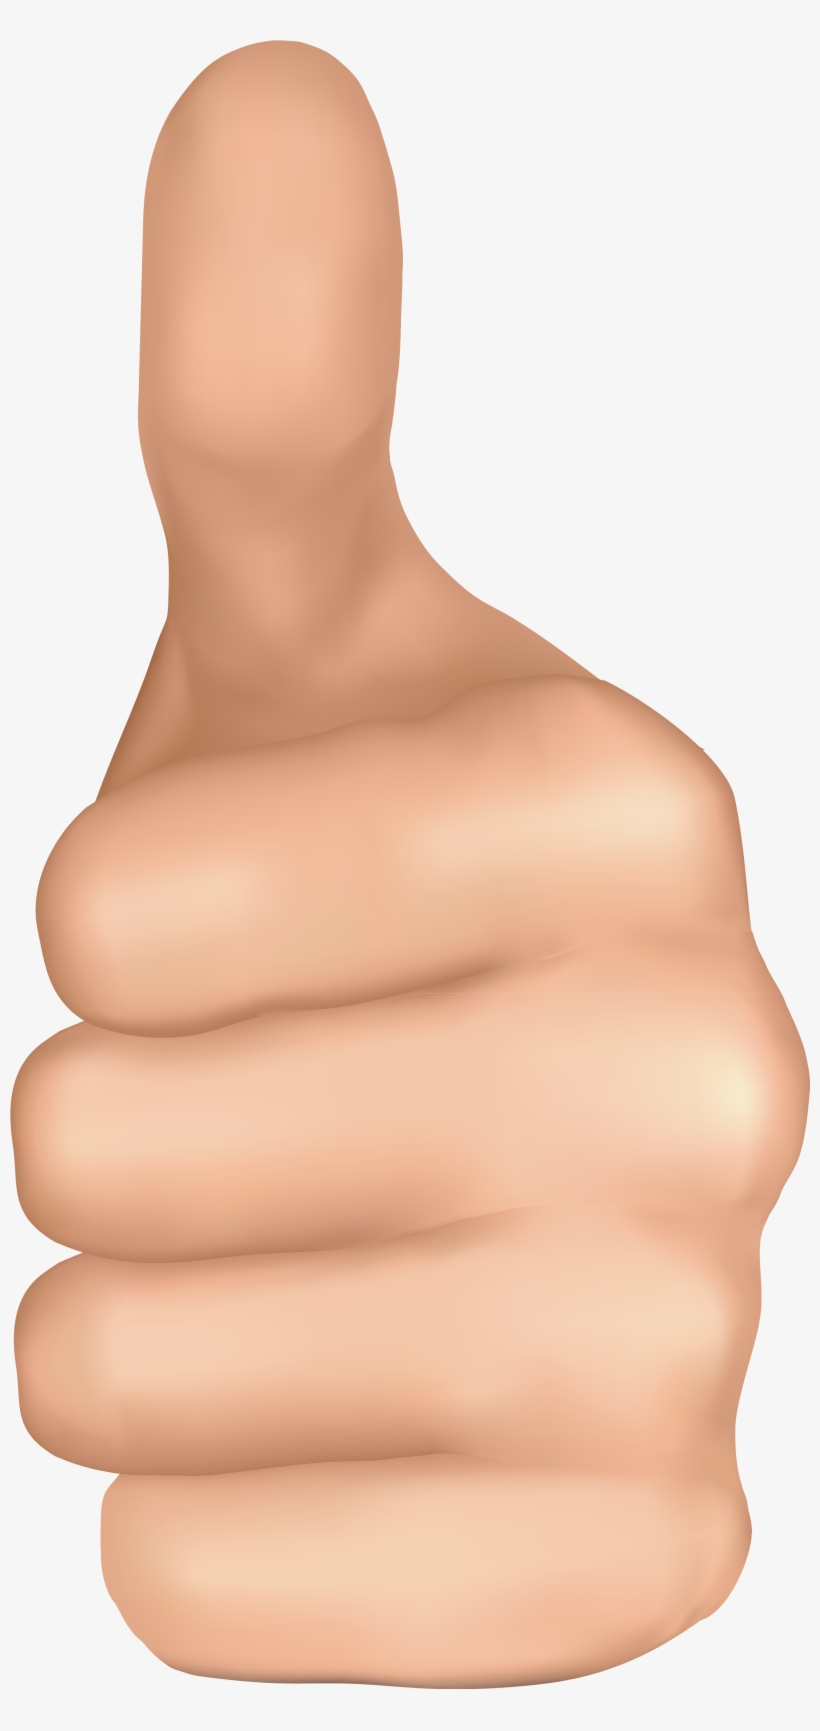 Up Hand Png Image Gallery Yopriceville High - Hand Thumbs Up Png, transparent png #504343